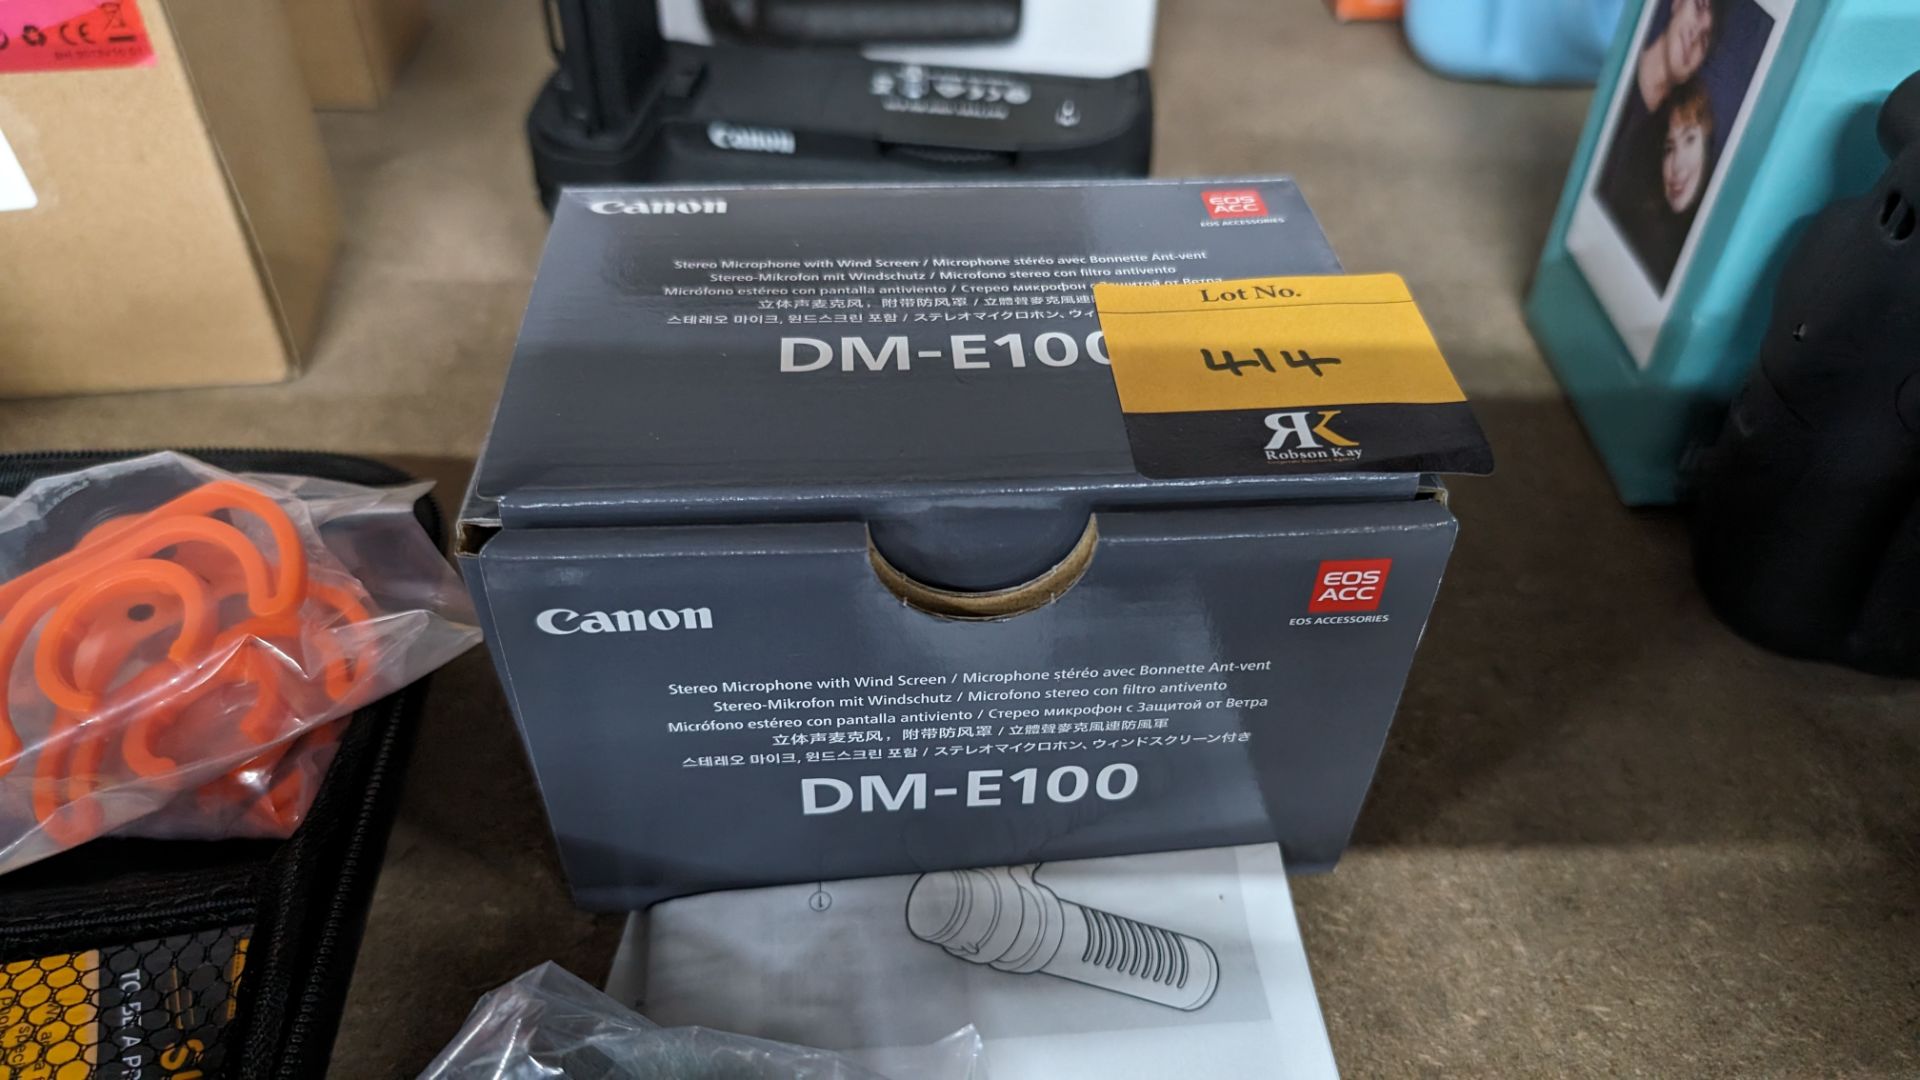 Canon model DM-E100 stereo microphone with wind screen - Image 12 of 14